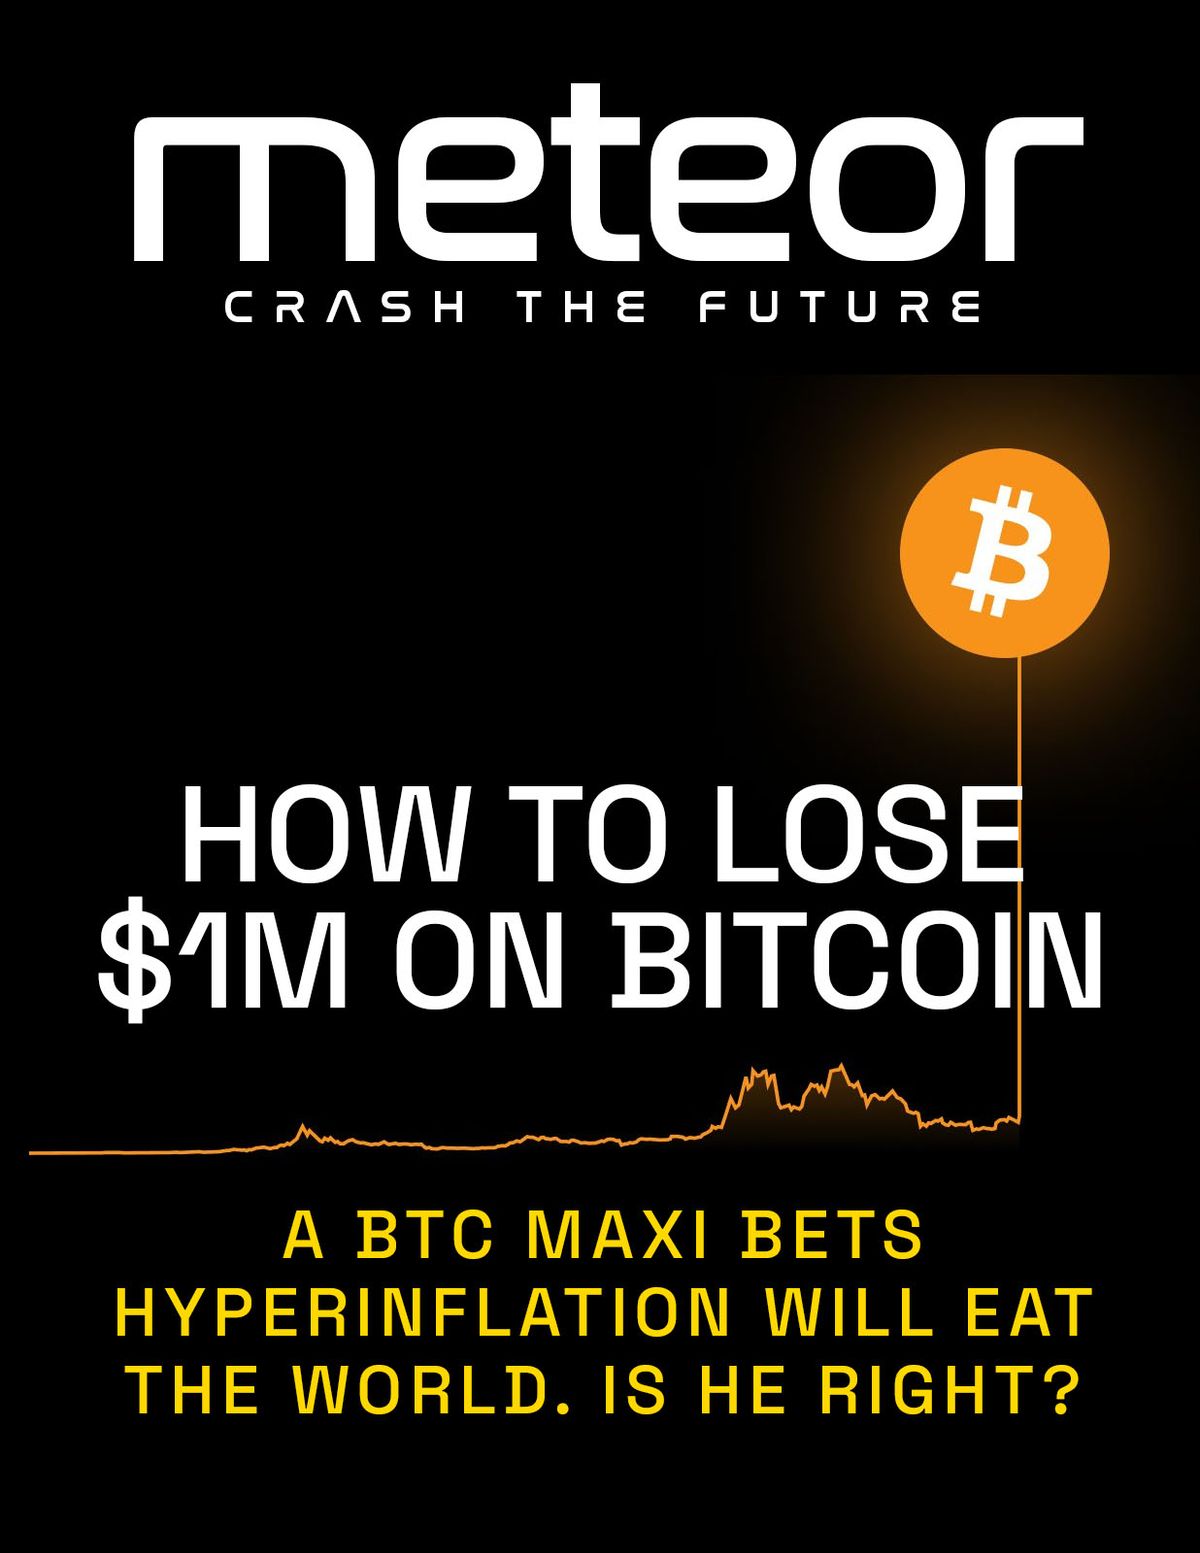 How to Lose $1M on Bitcoin